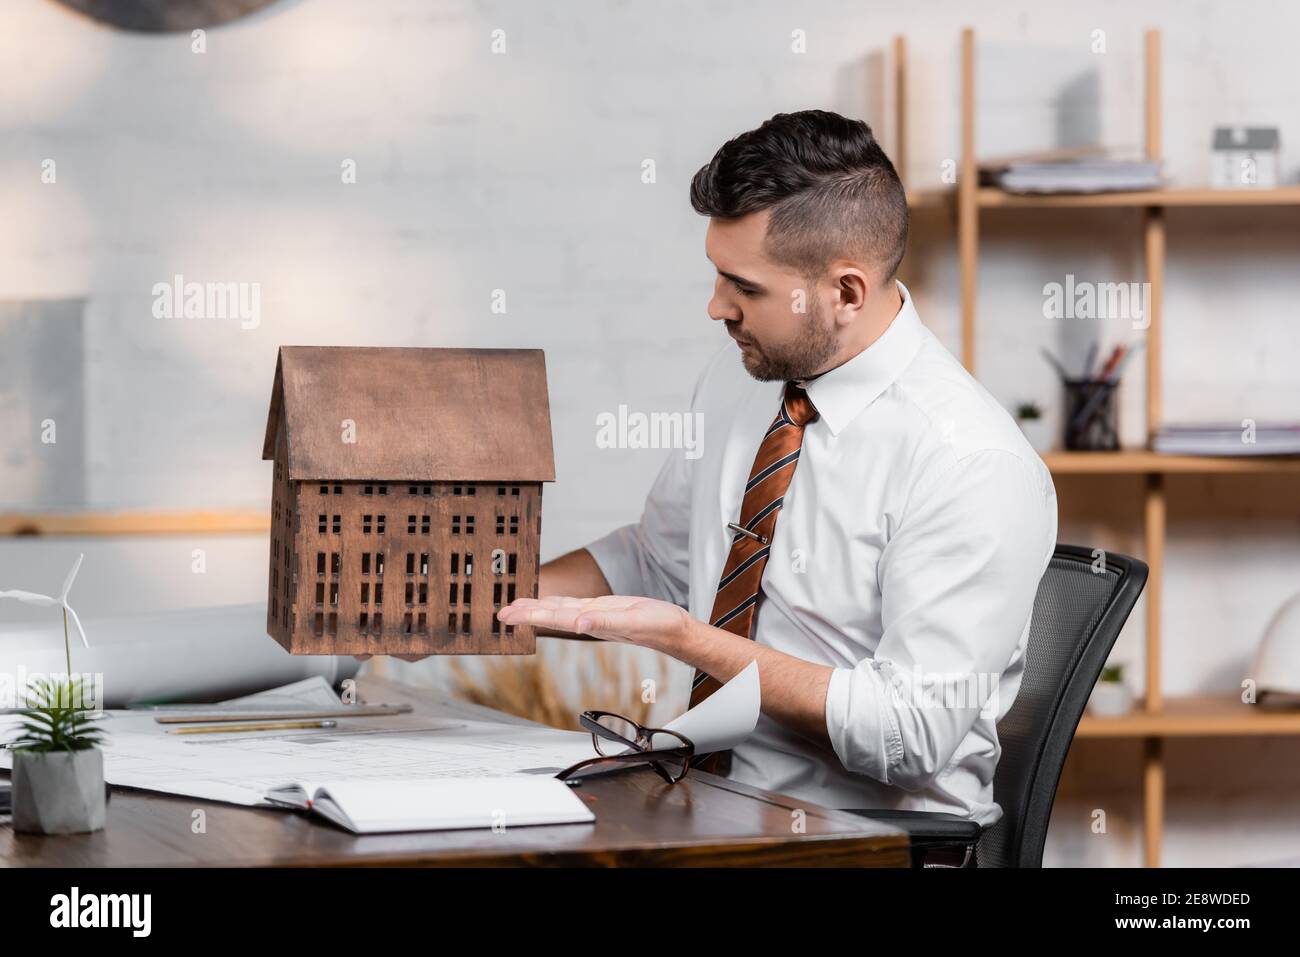 architect sitting at workplace and pointing with hand at house model Stock Photo